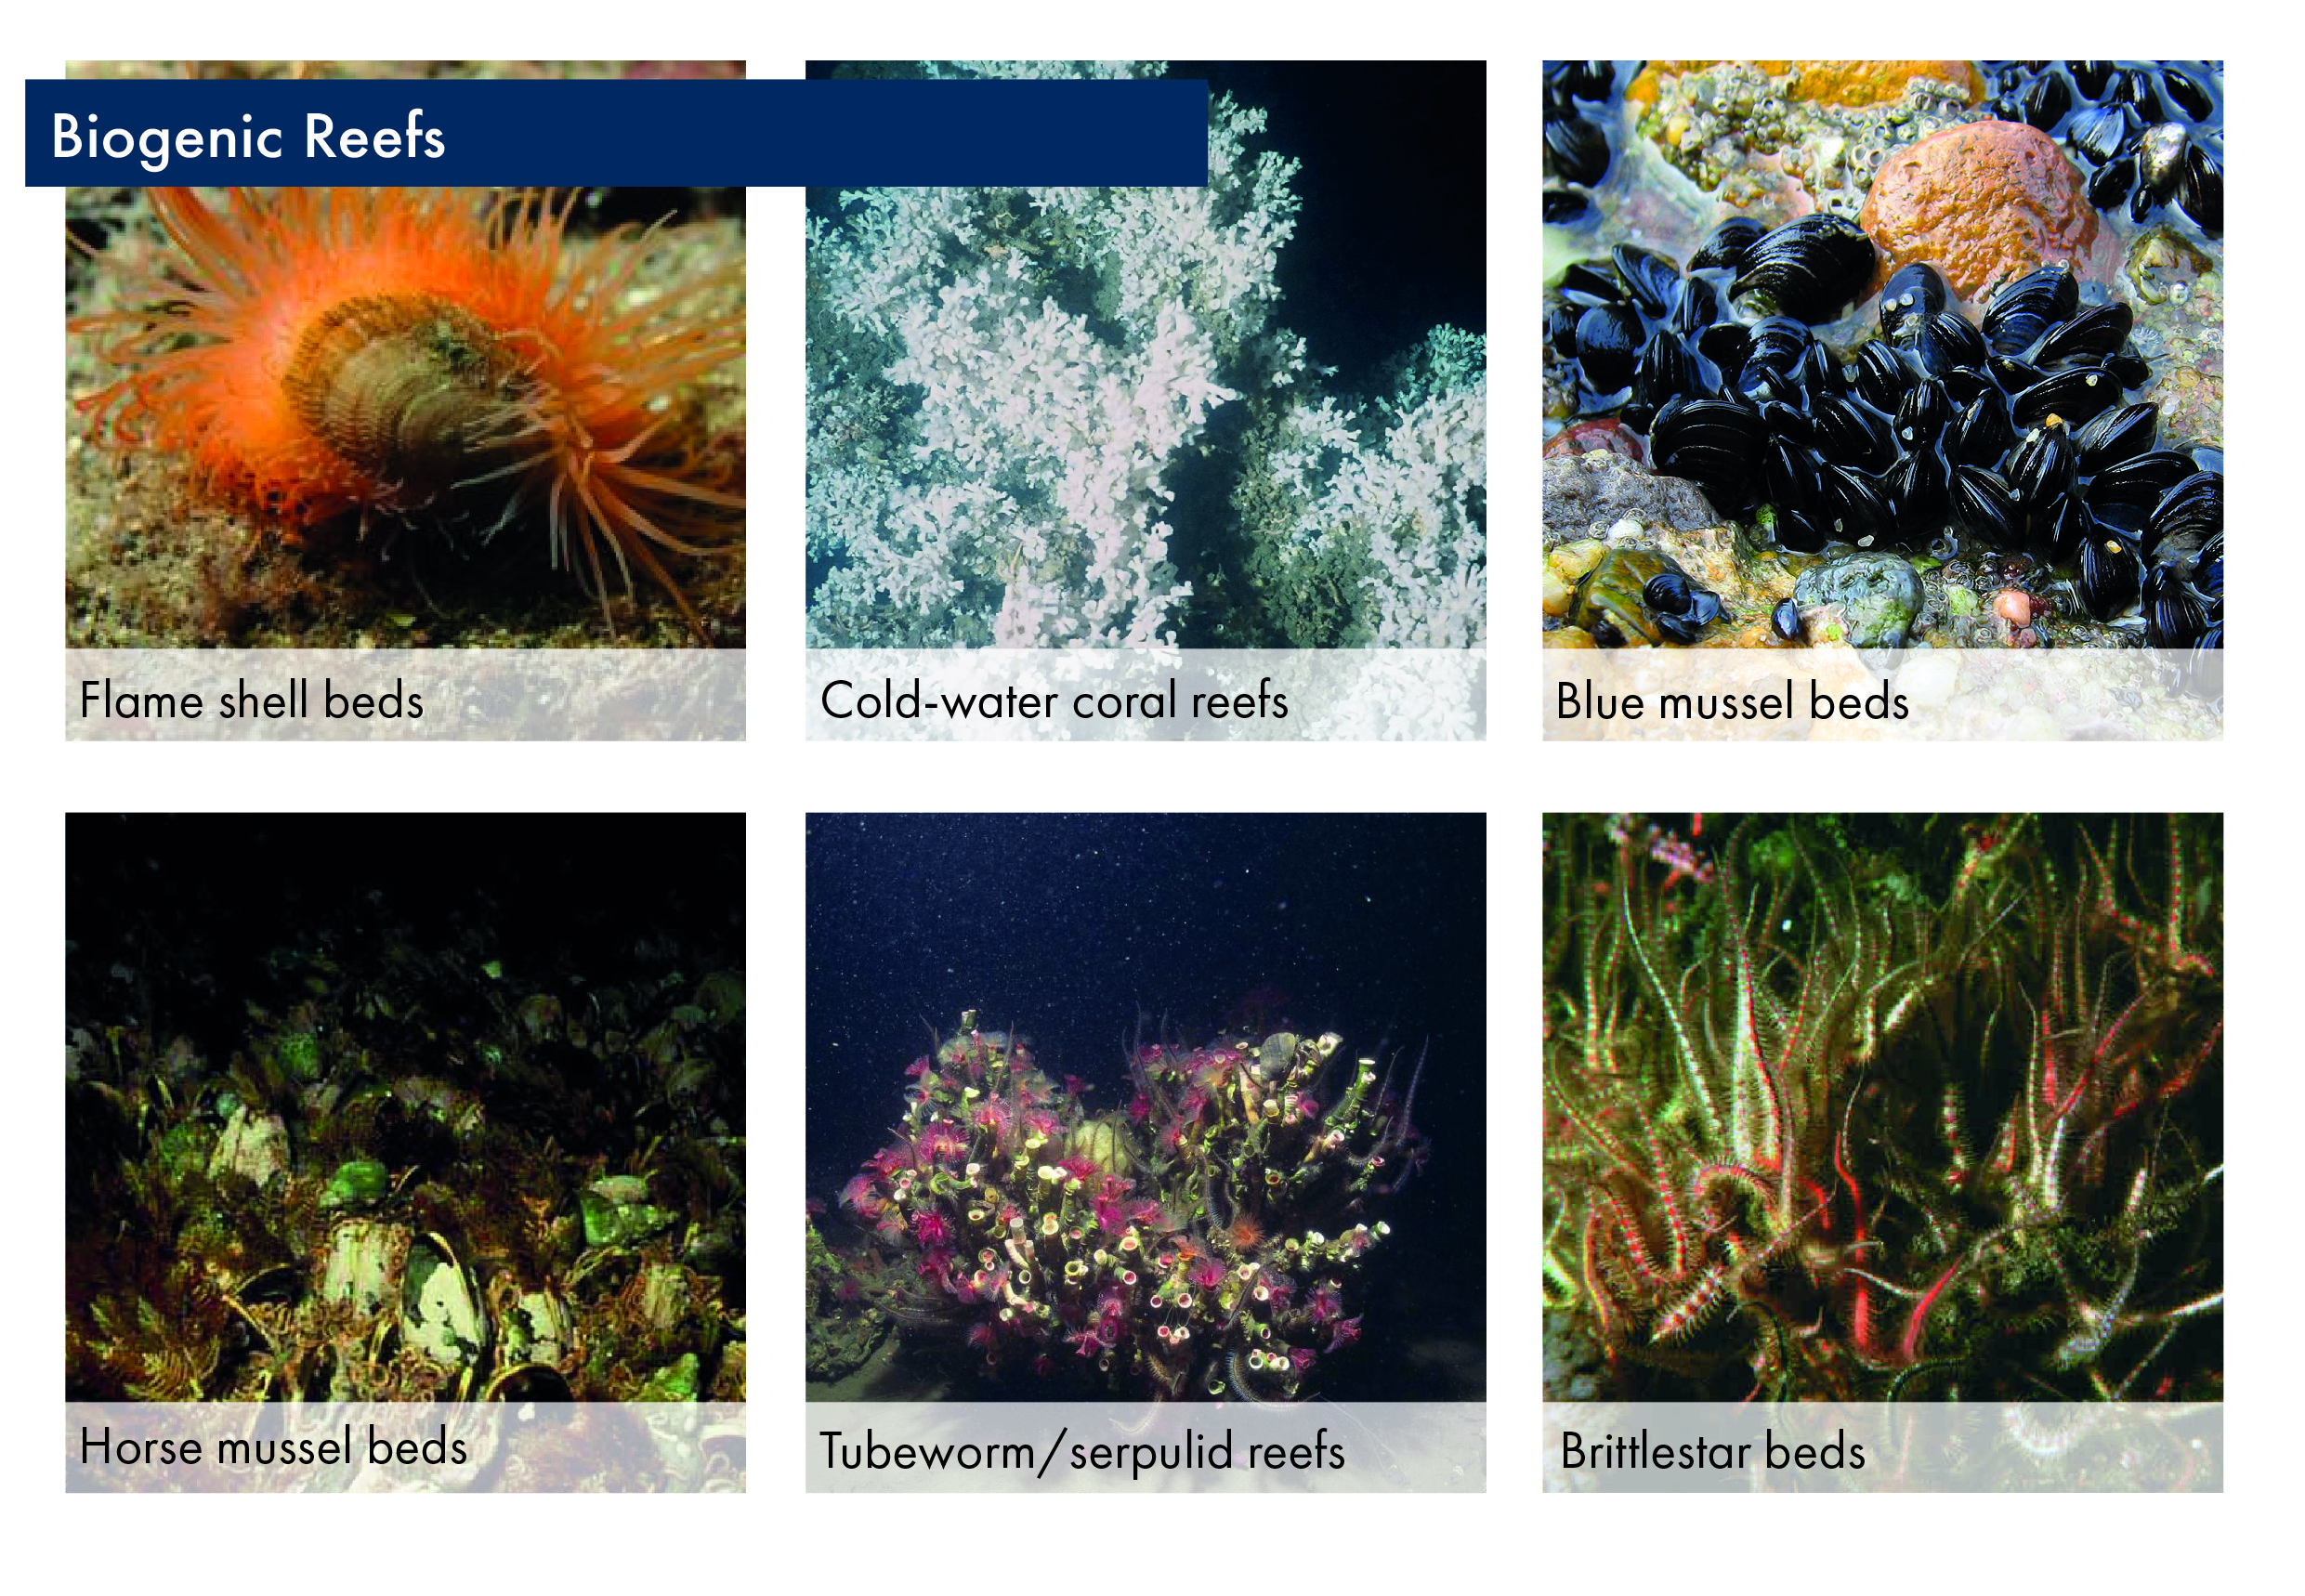 Compiled photographic images of biogenic reef forming habitats in Scotland including, flame shell beds, cold-water corals, horse mussel beds, blue mussel beds, tubeworm/serpulid reefs, brittlestar beds.